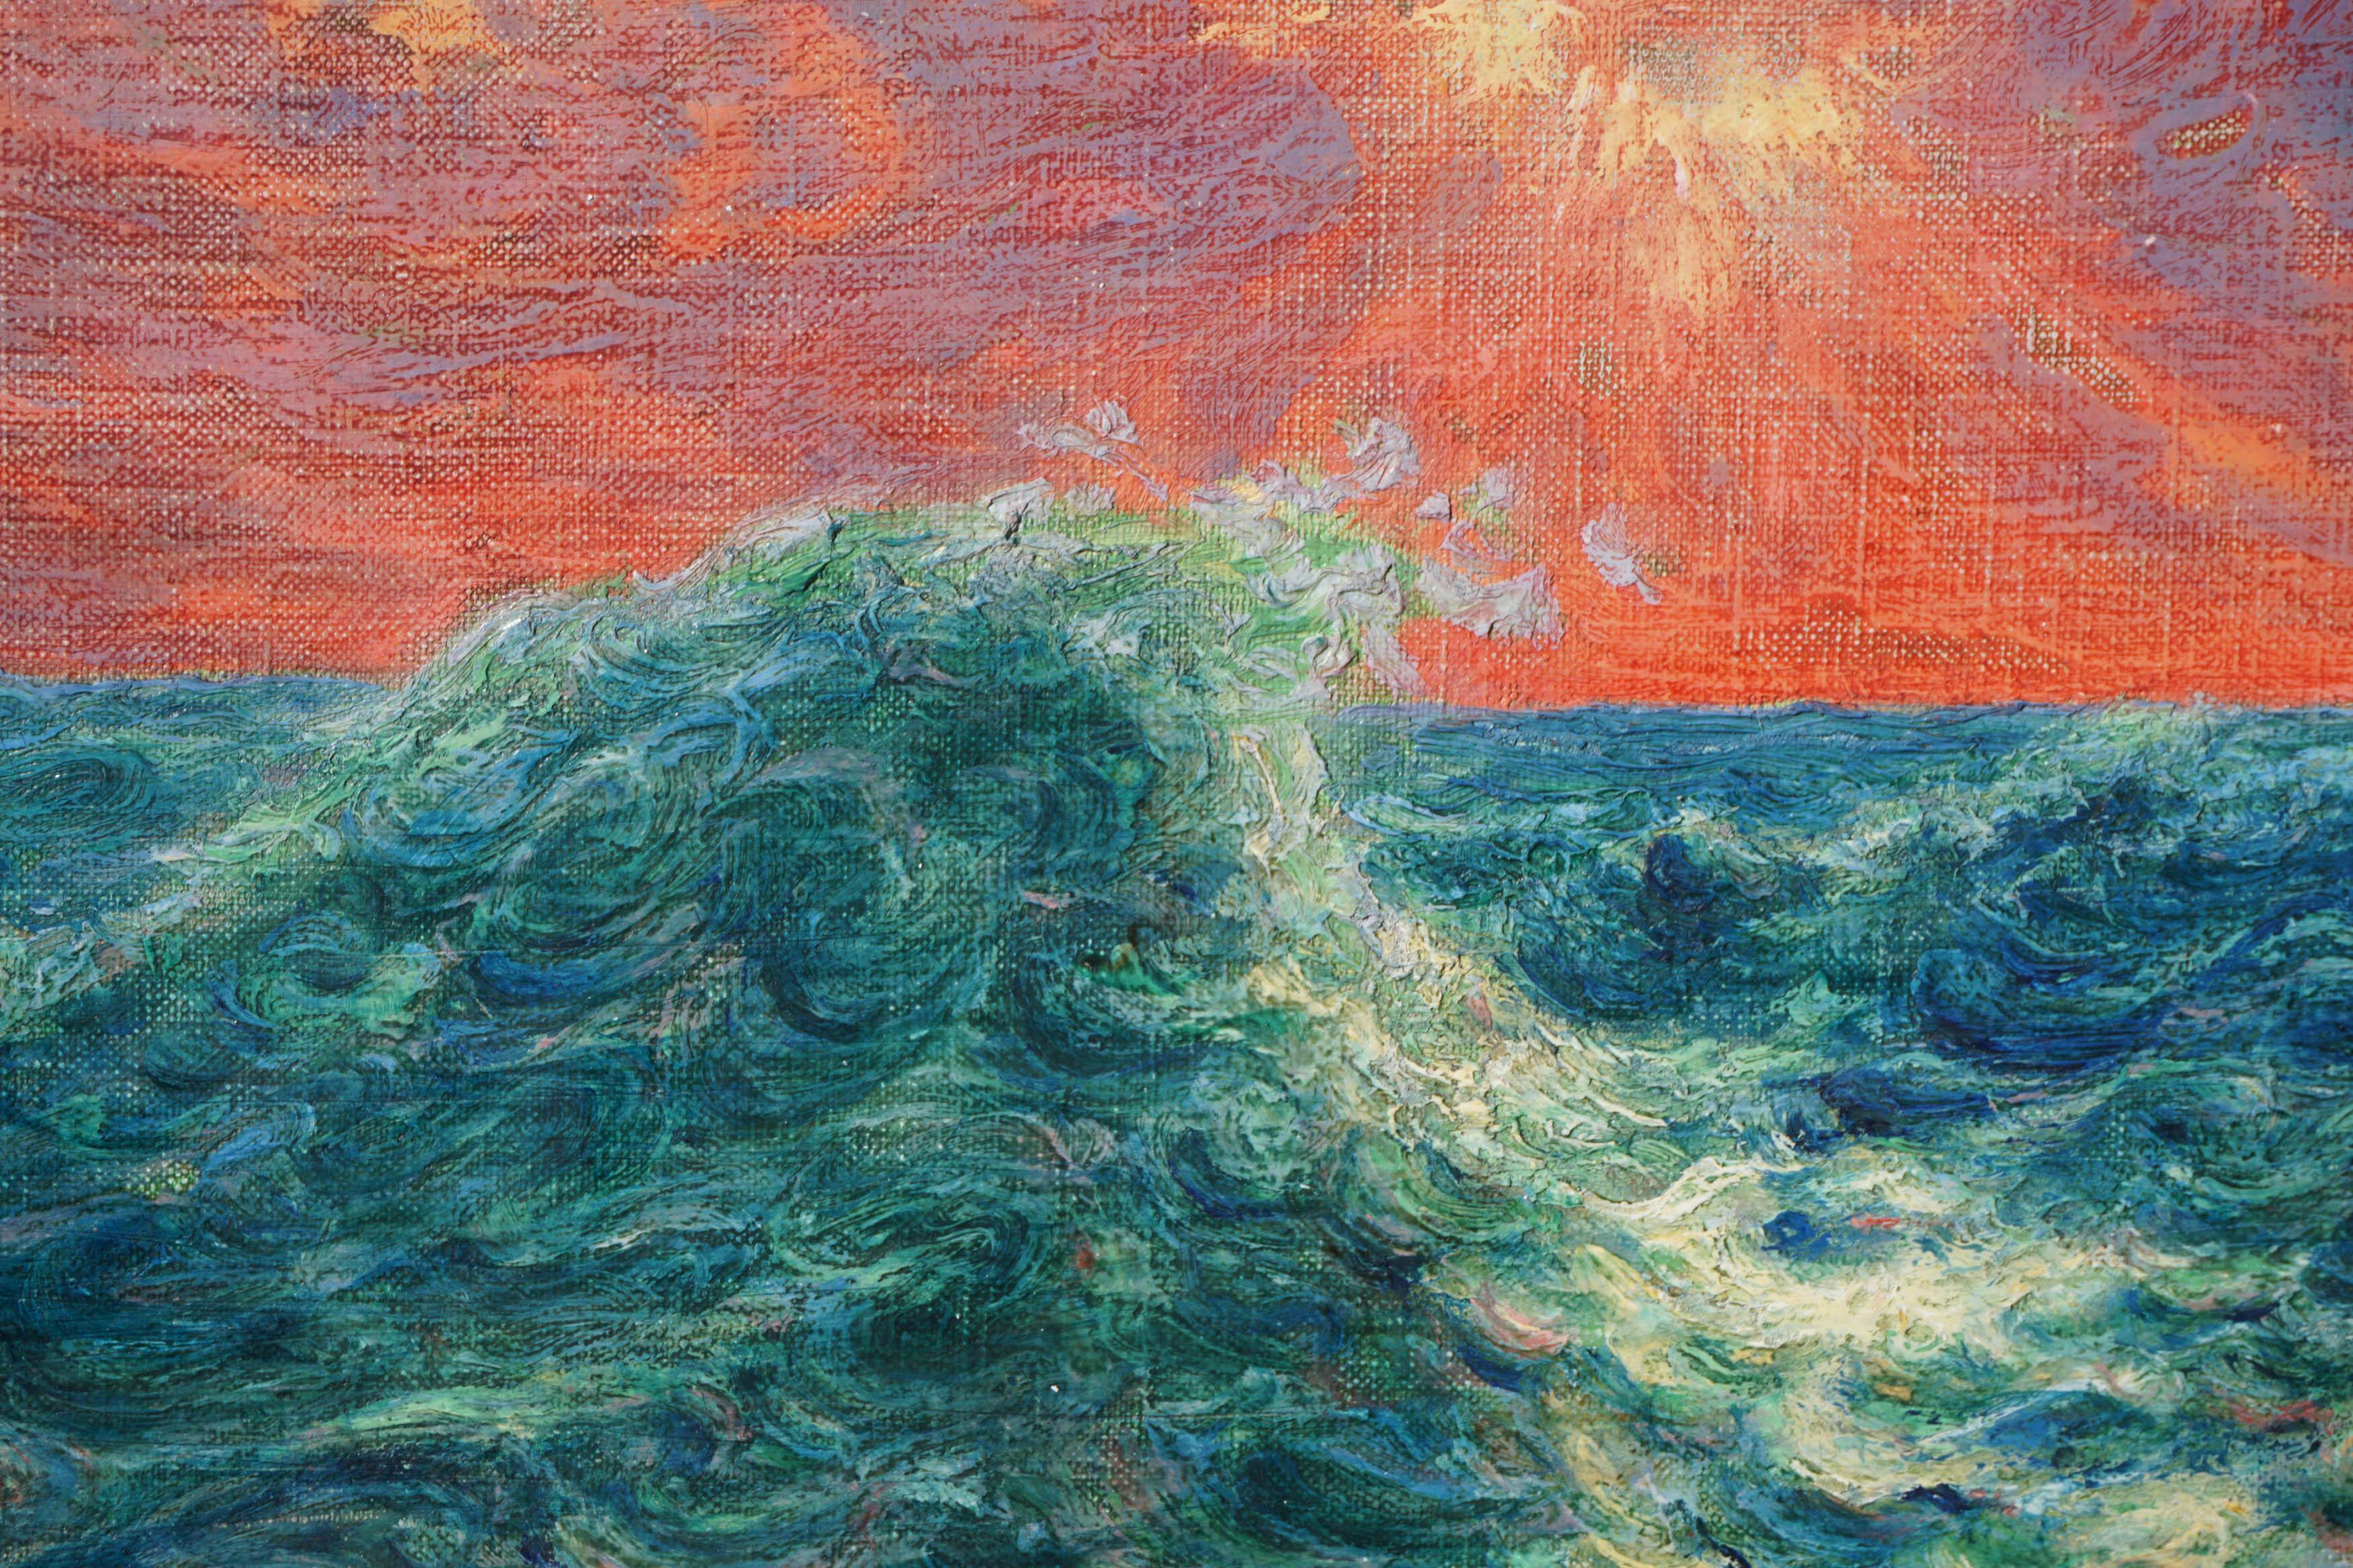 Fauvist Ocean Wave and Sunset, 1920's Seascape  - Painting by John Henry Ramm